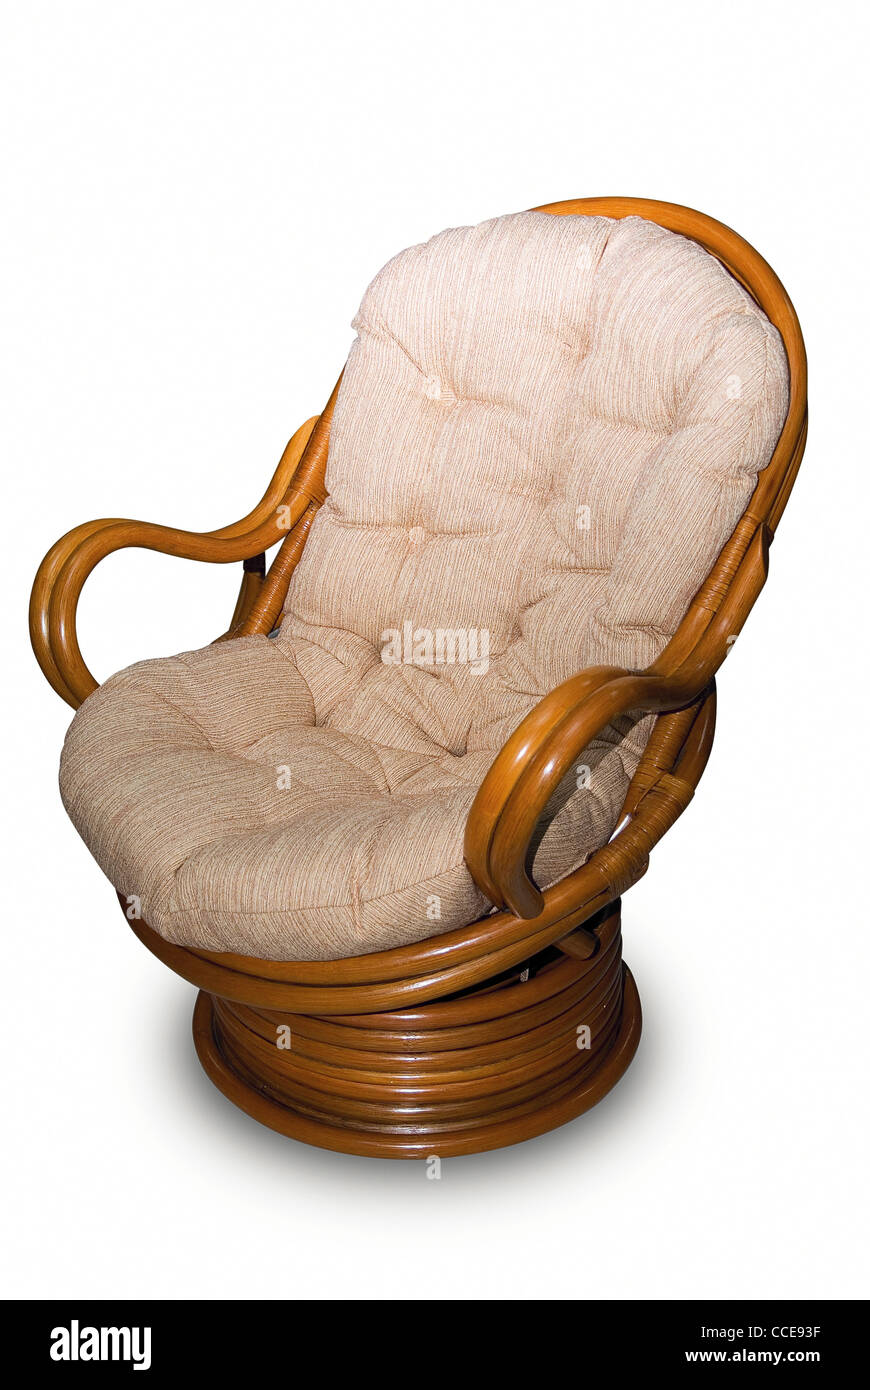 Rocking chair isolated on white background Stock Photo